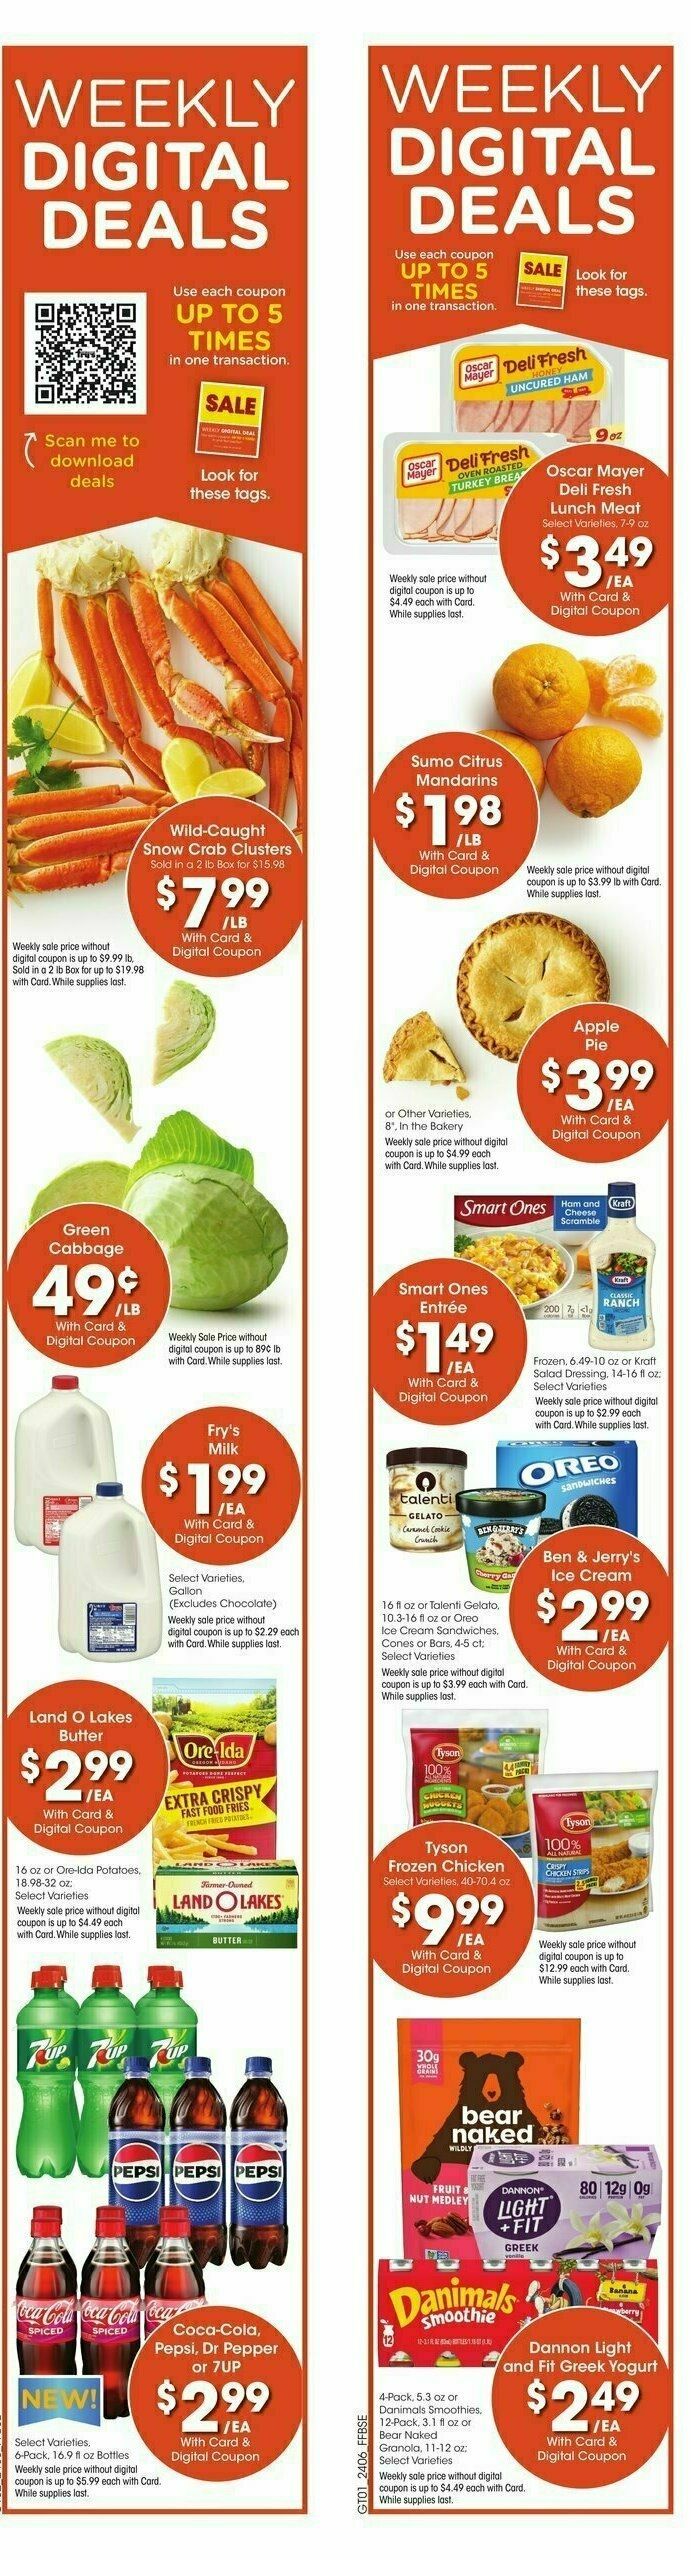 Fry's Food Weekly Ad from March 13